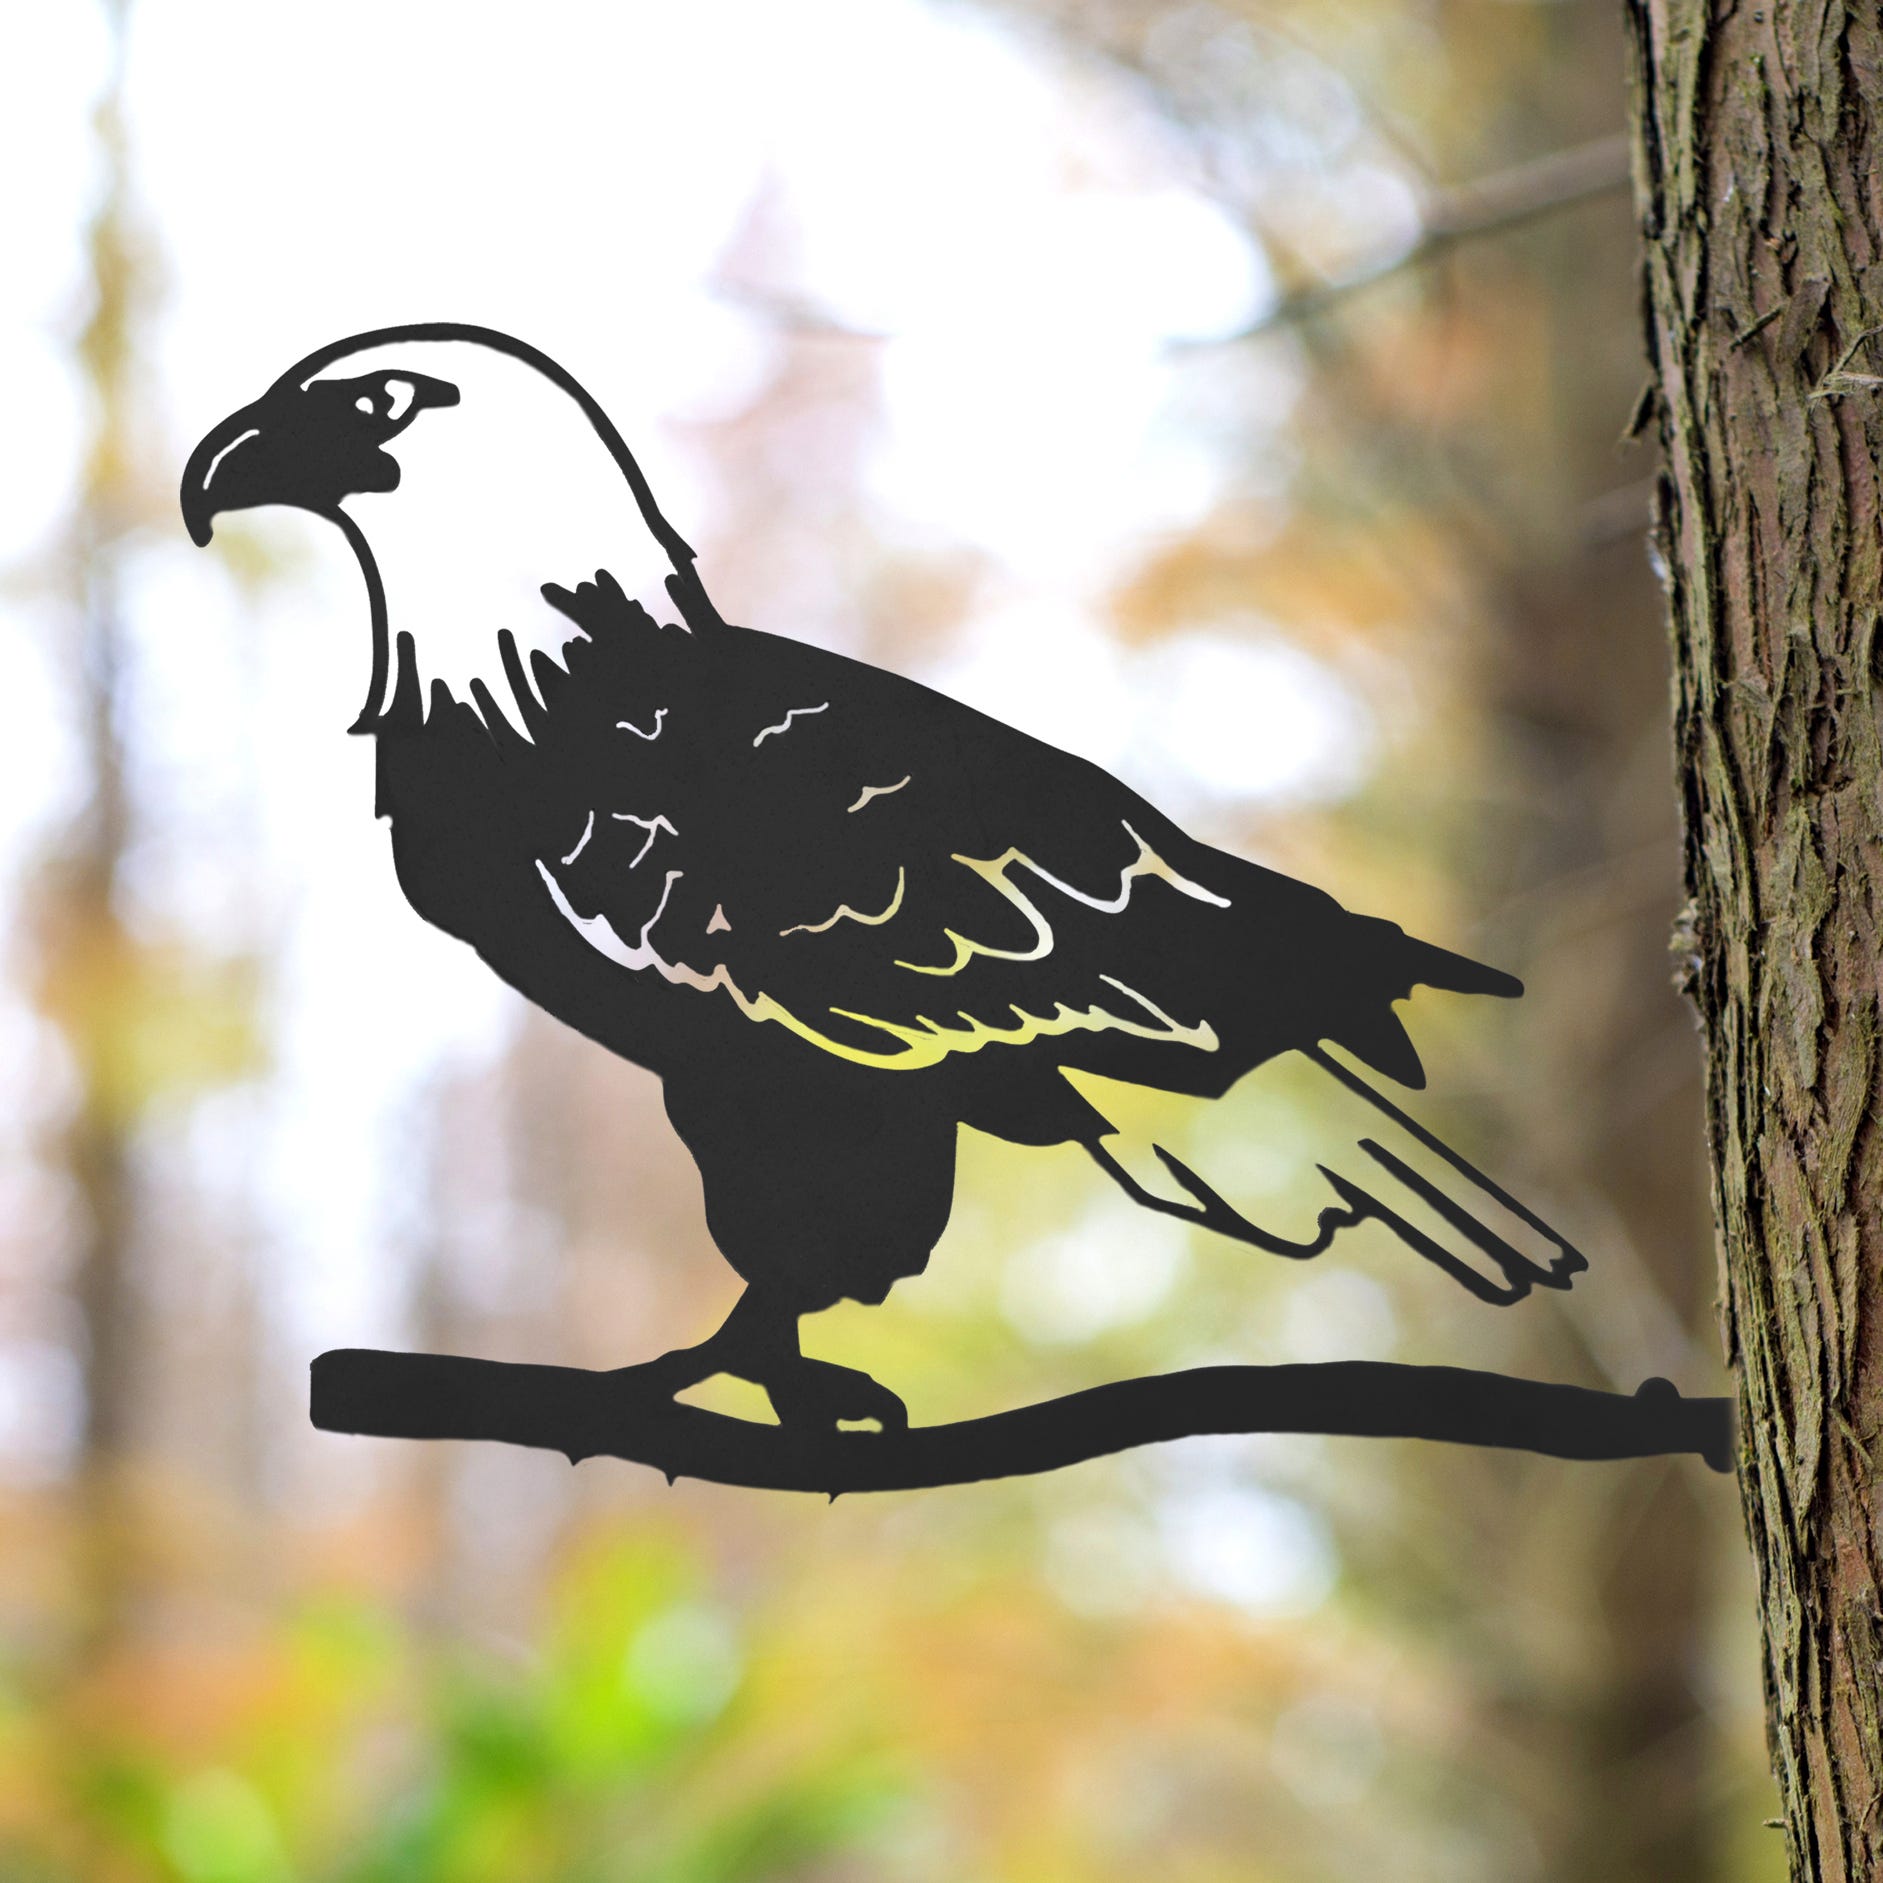 A silhouette of an eagle perched on a branch with a blurred foliage background.